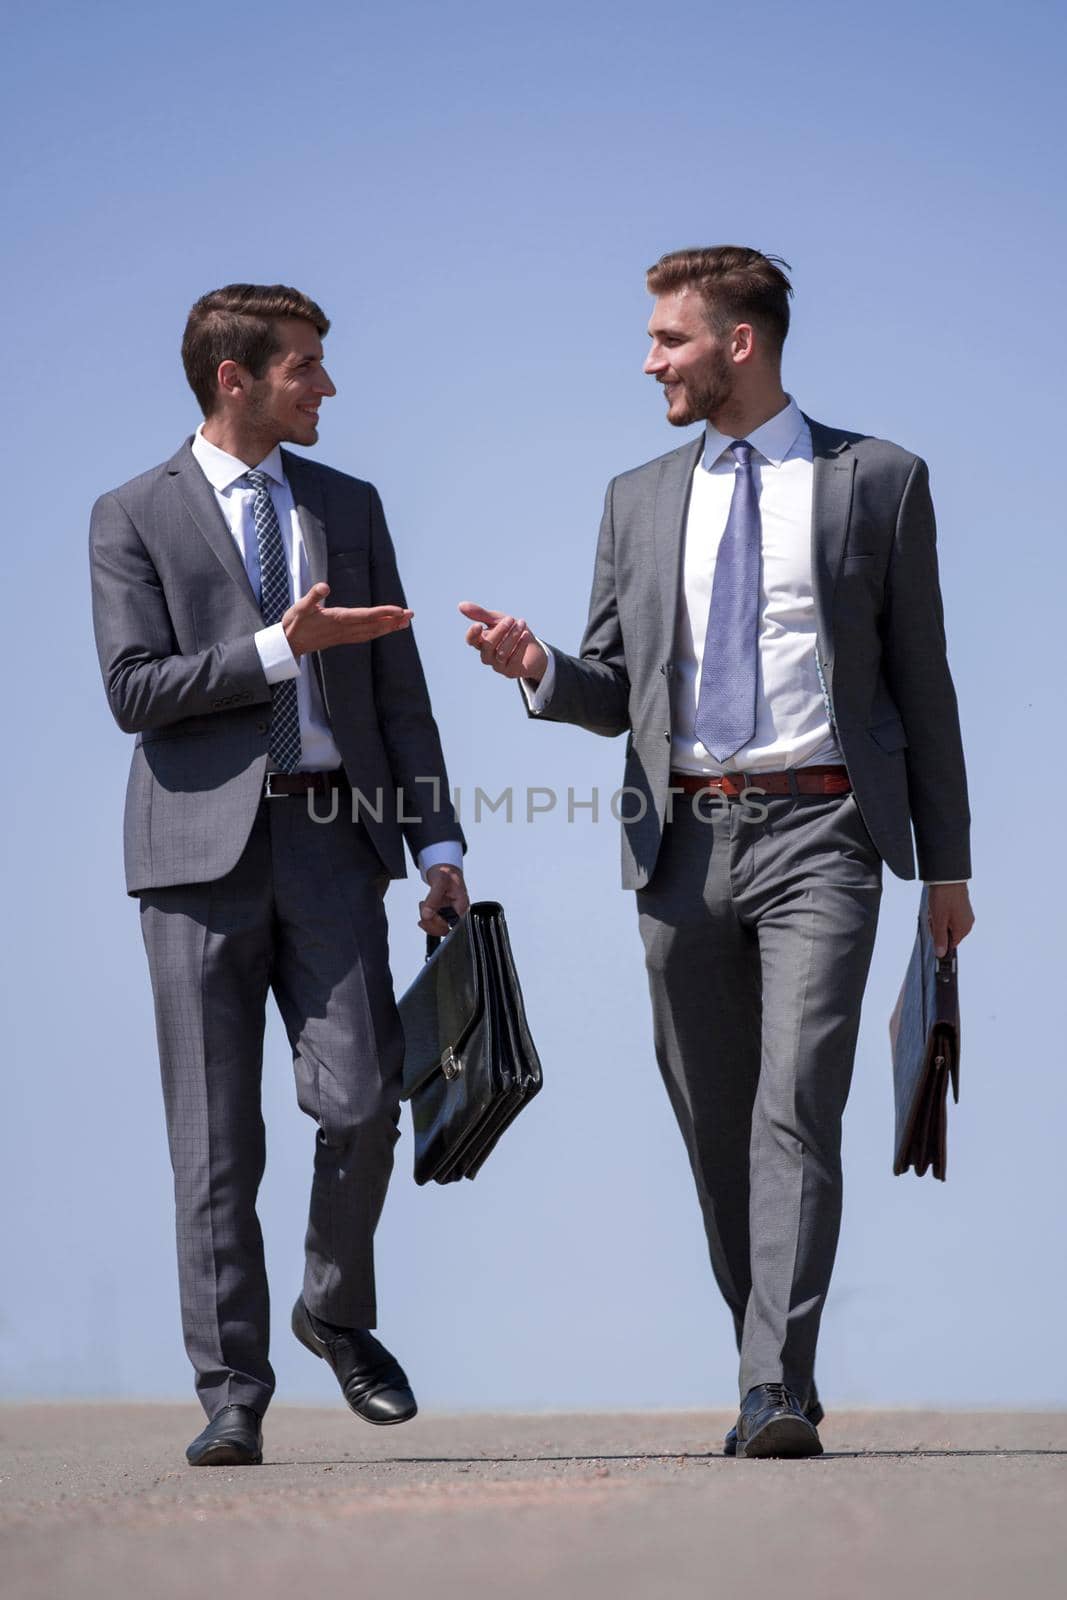 business people discuss something on the street .photo with copy space